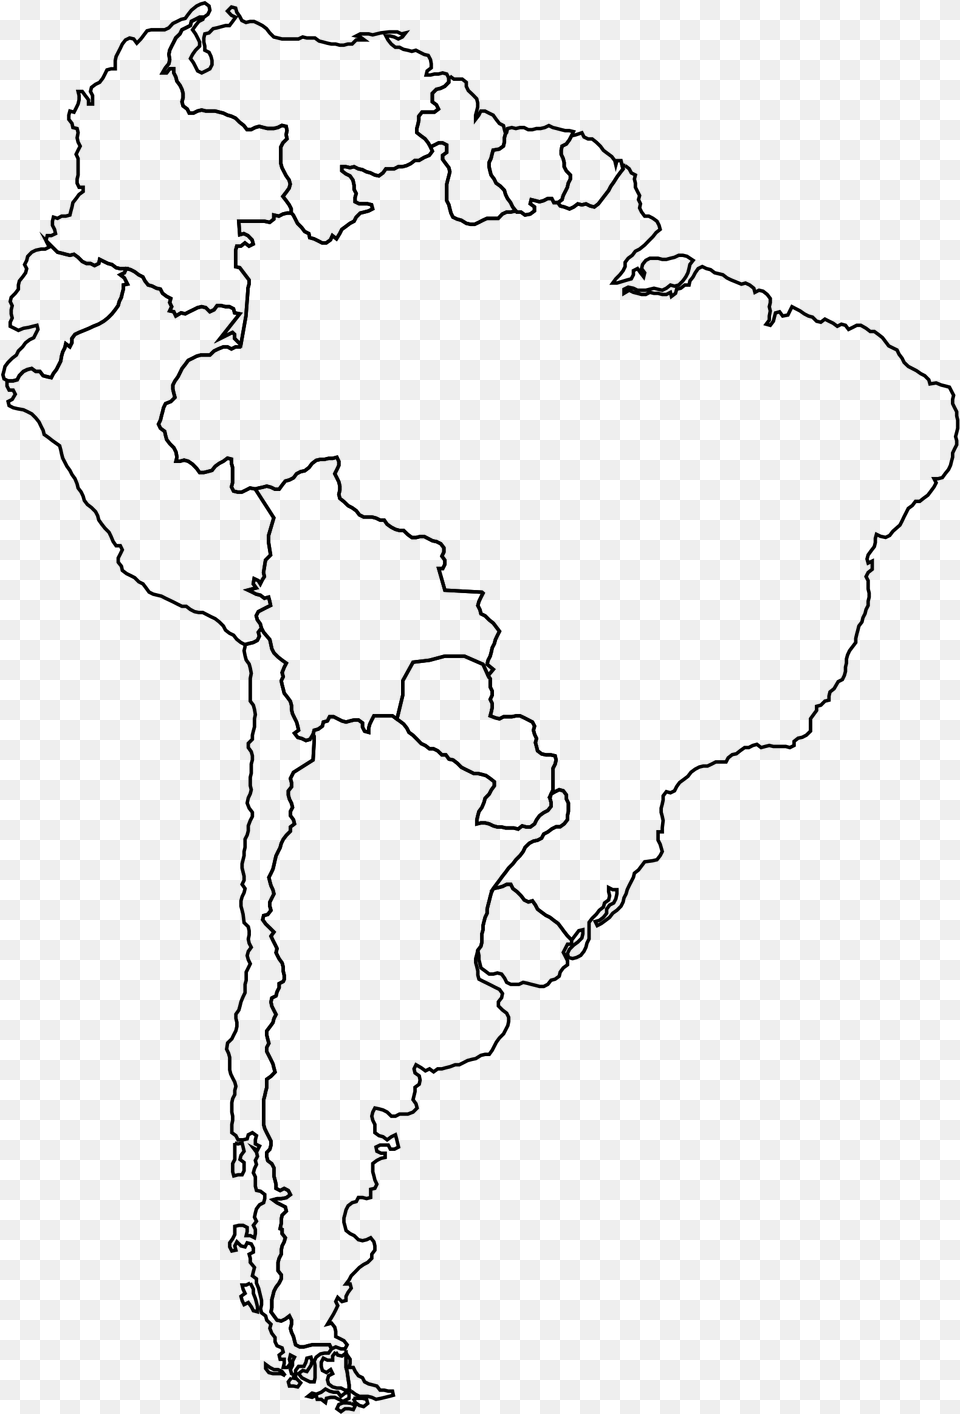 South America Free Huge Freebie Download For Blank Map Of South America, Gray Png